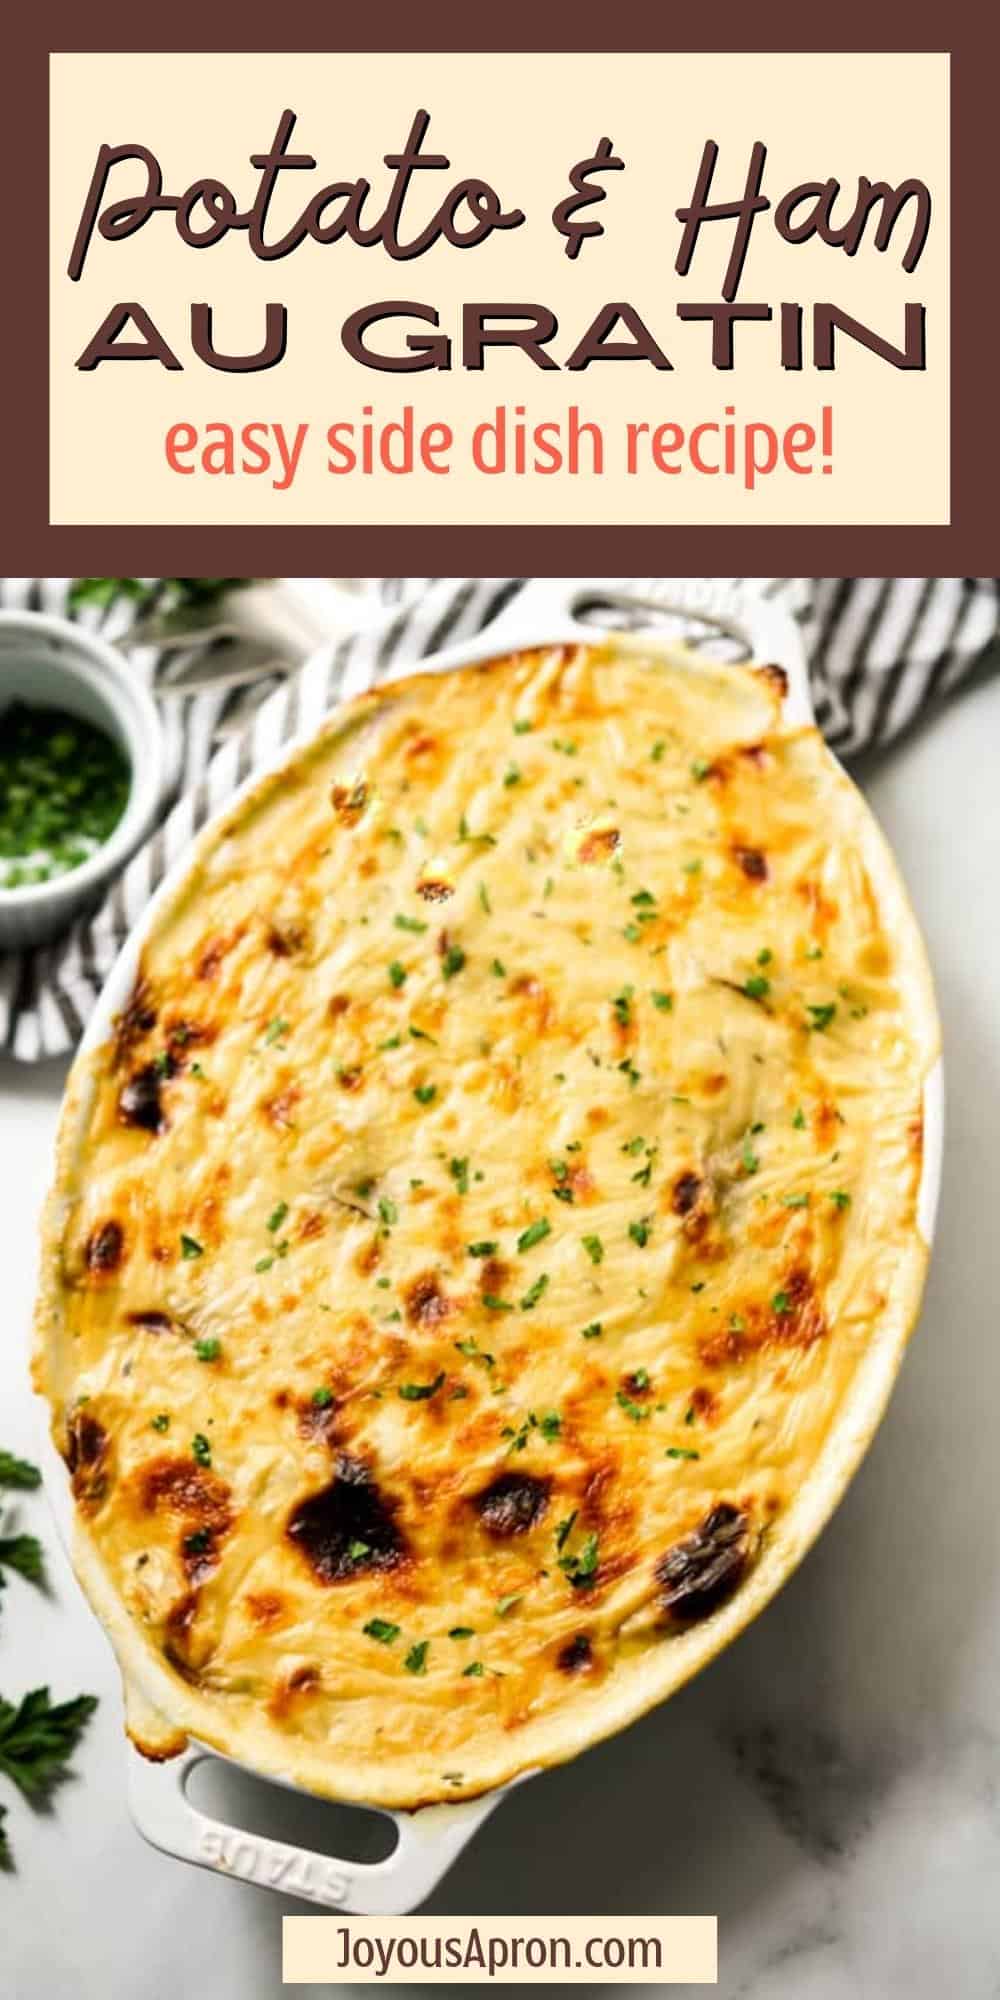 Potato and Ham Au Gratin - Creamy and rich cheesy potatoes layered with ham slices, oven baked to perfection! This delicious comfort food potato casserole dish is perfect for the holidays! via @joyousapron